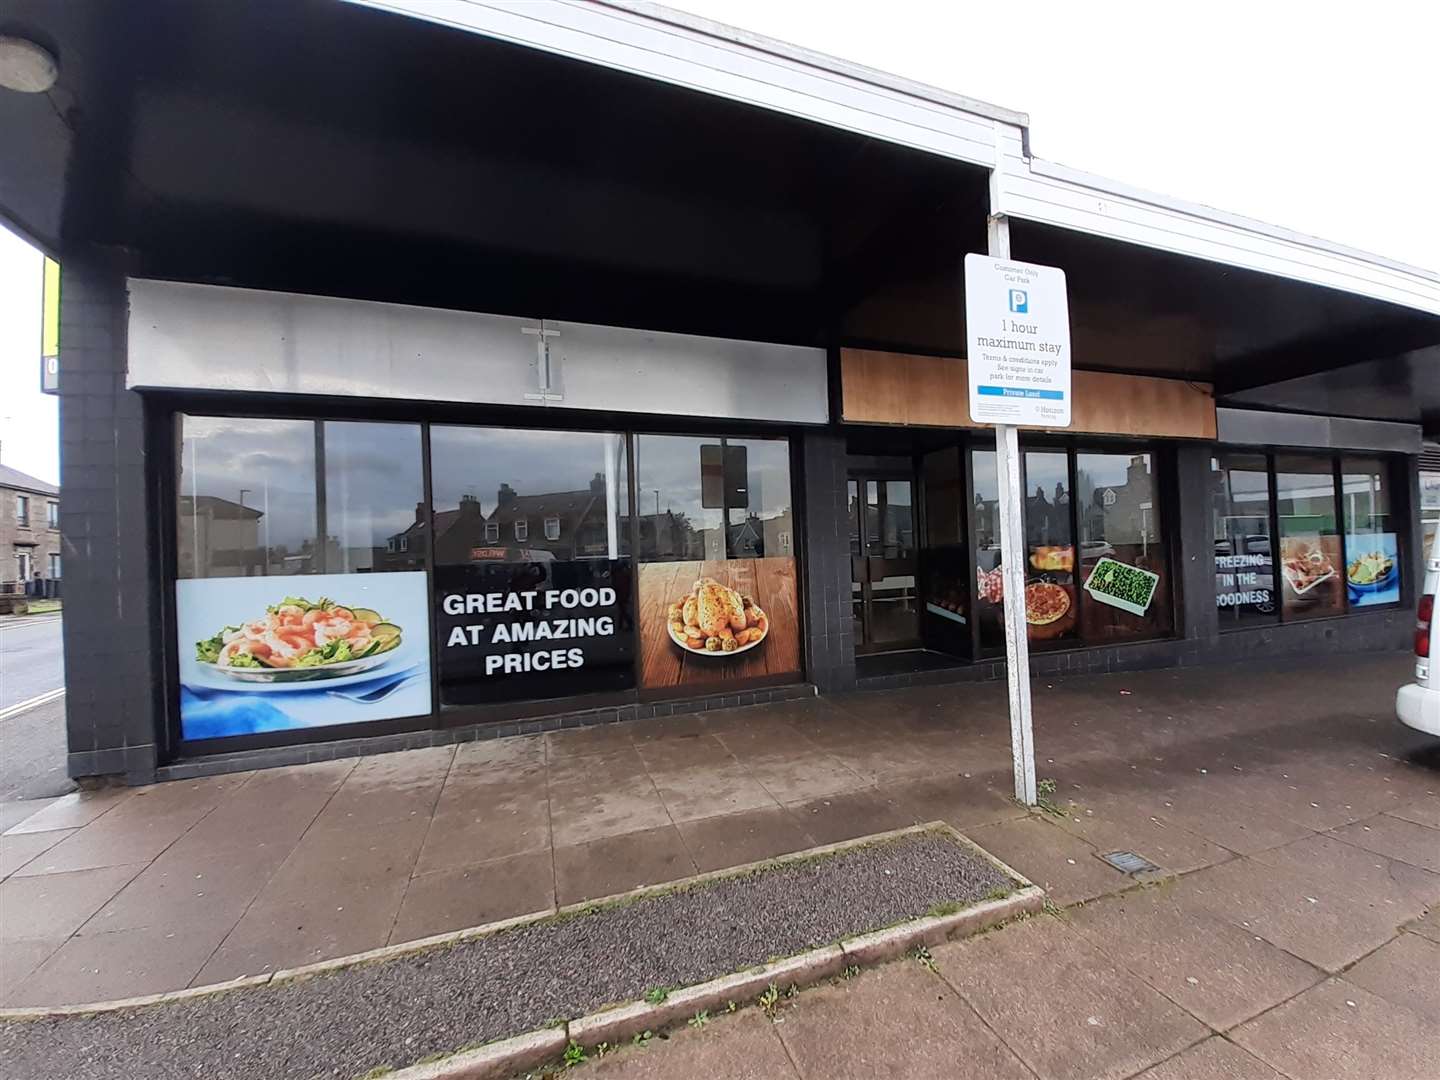 Plans have been approved for the former Farmfoods store to be turned into a restaurant